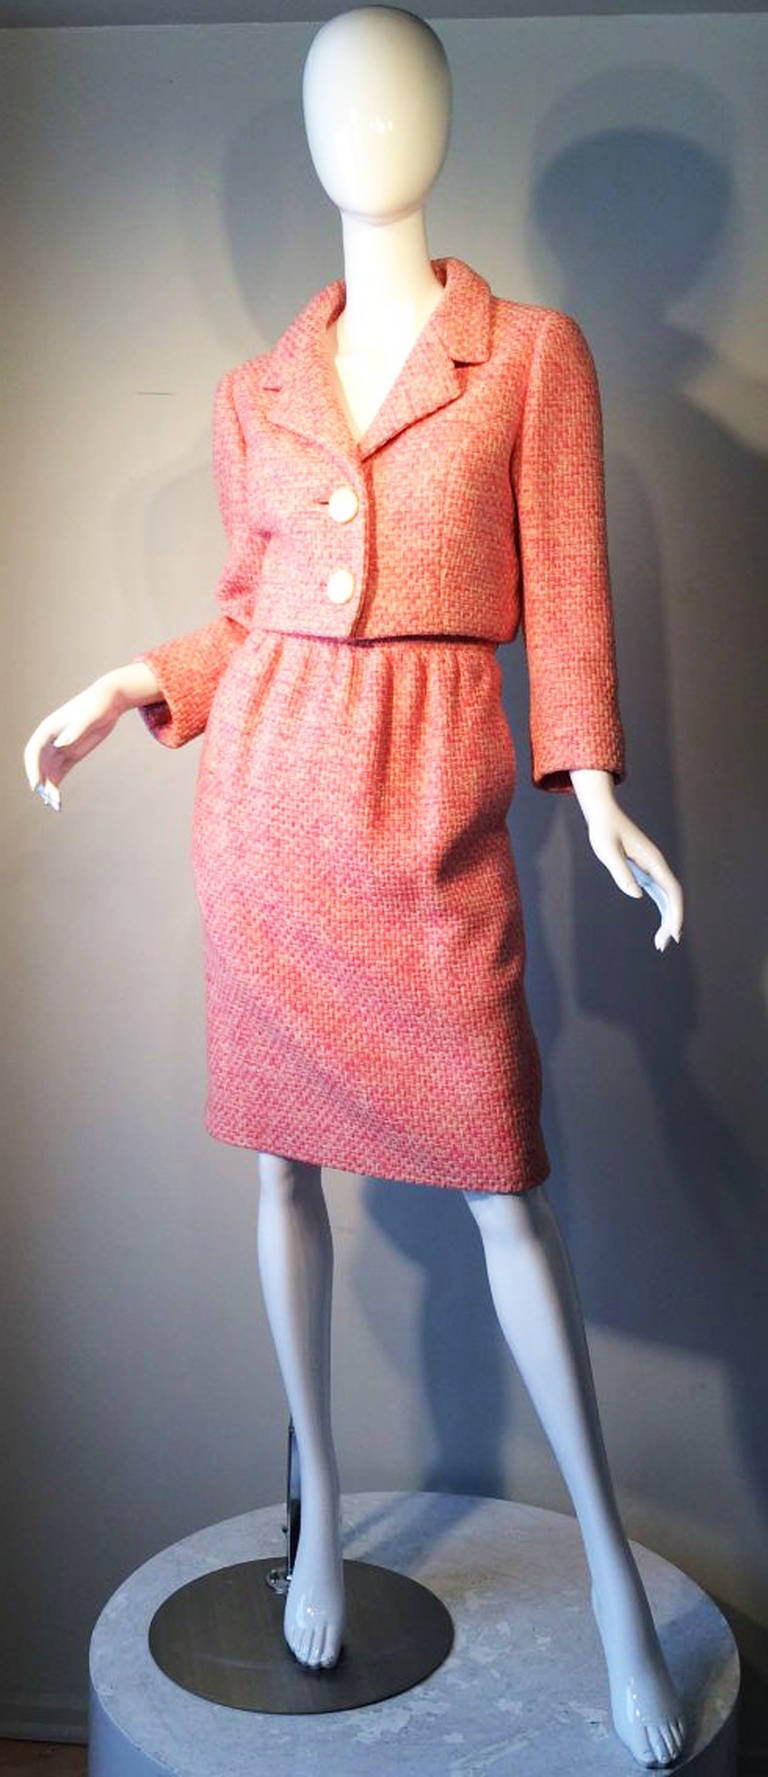 A fine and classic Norman Norell 2pc. day suit. Pink and ivory woven wool fabric item fully silk lined with button and zipper closures. Pristine appears unworn.